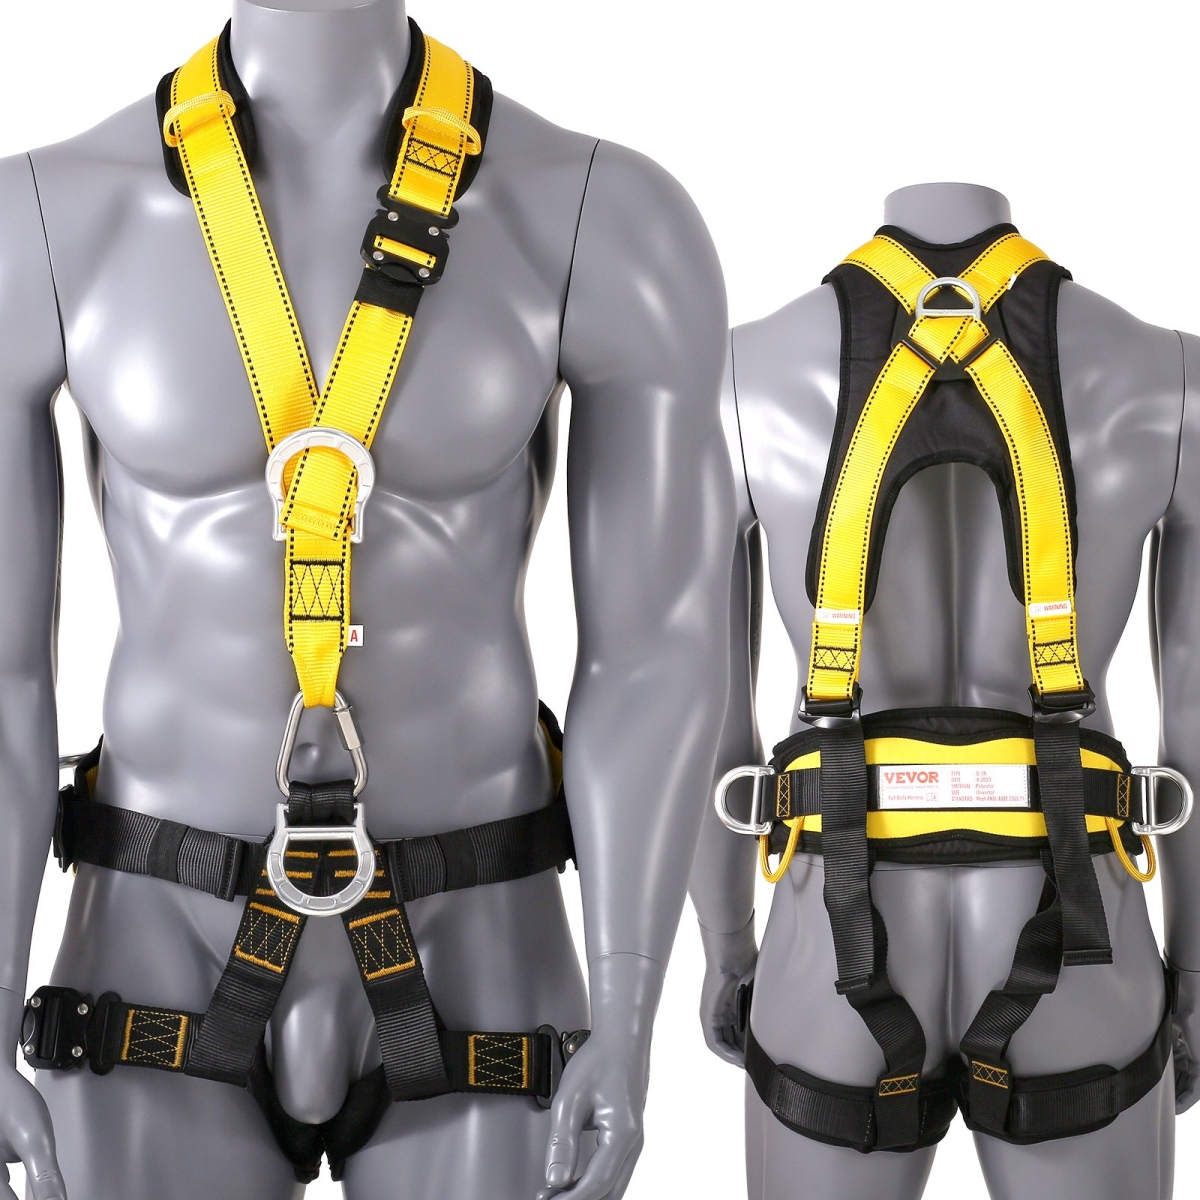 Picture of Vevor QSSAQDNLSJBY5C5NJV0 340 lbs Safety Harness